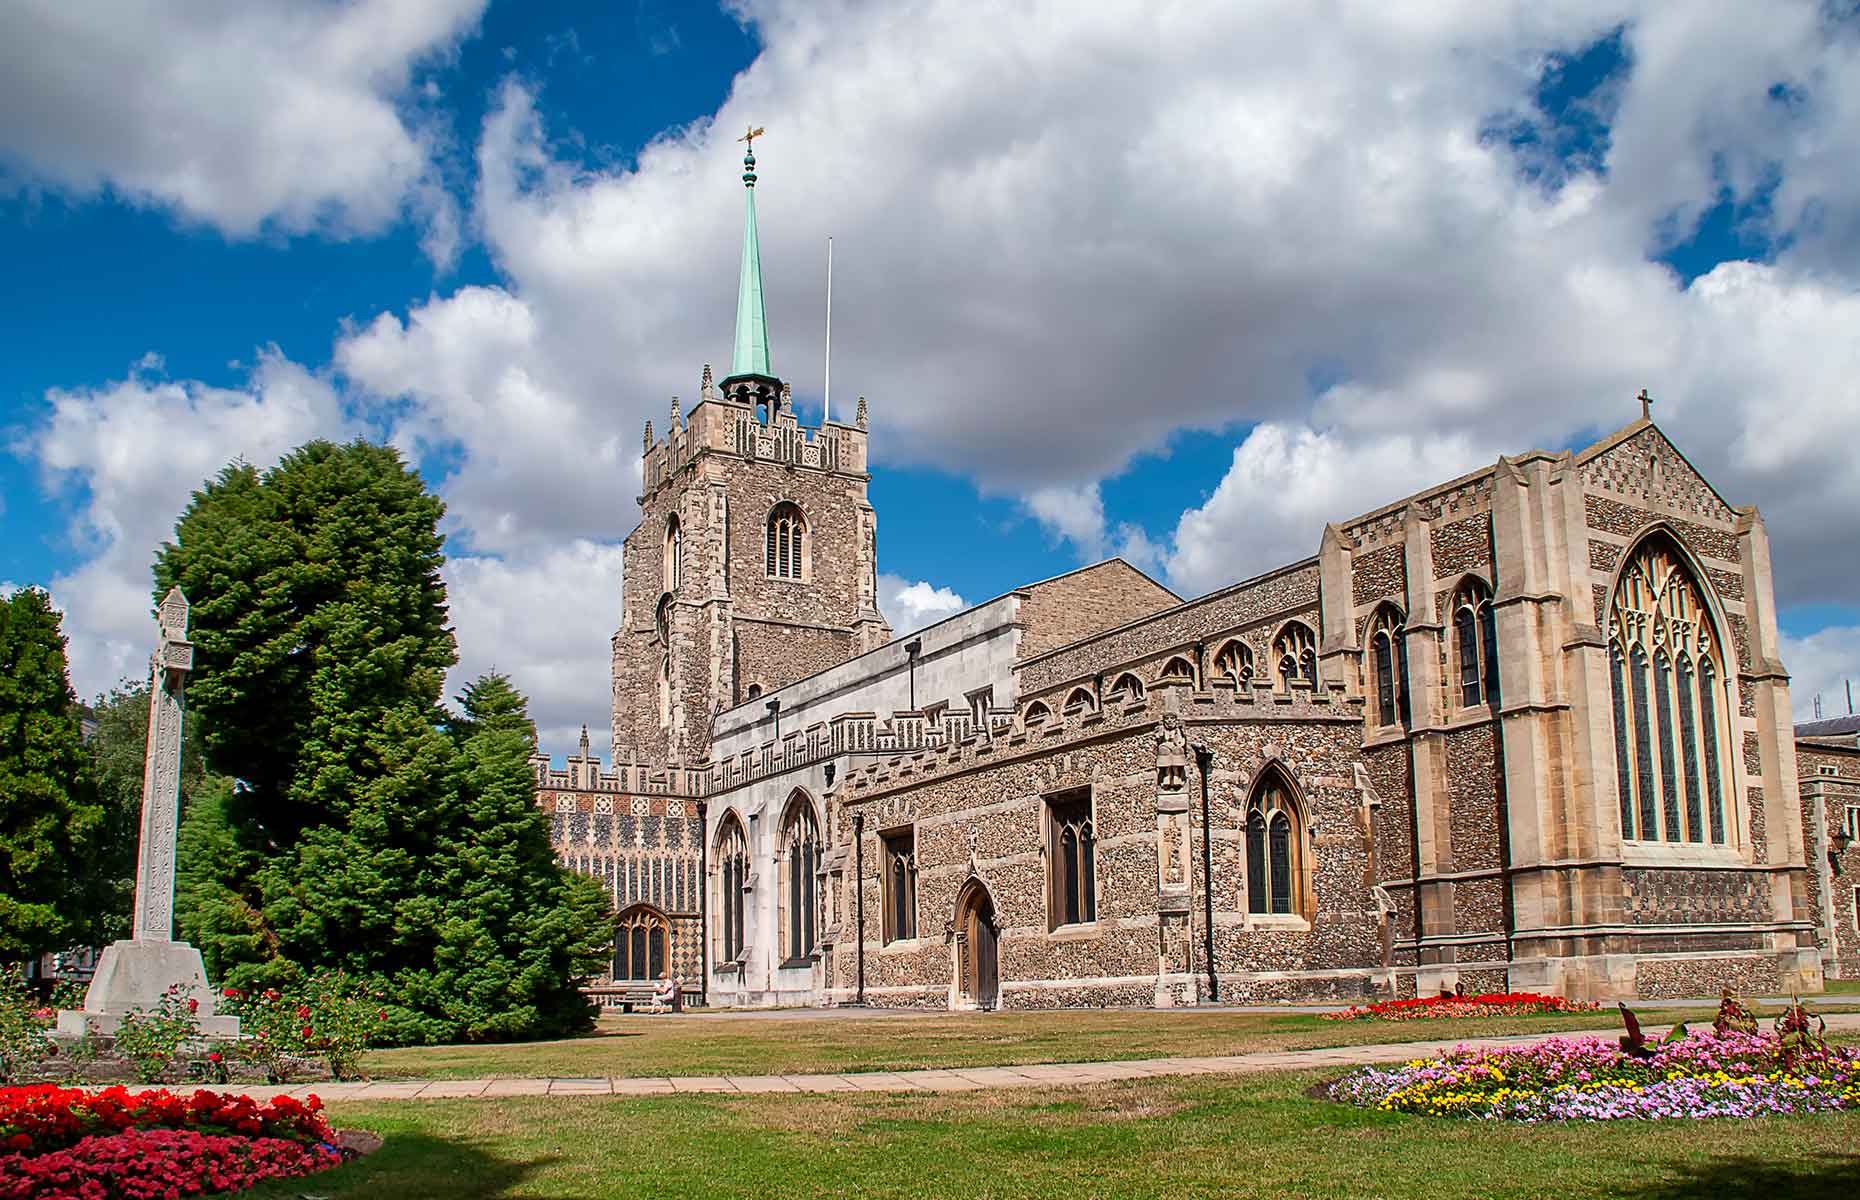 Chelmsford Cathedral (Image credit: Rob Atherton/Shutterstock)